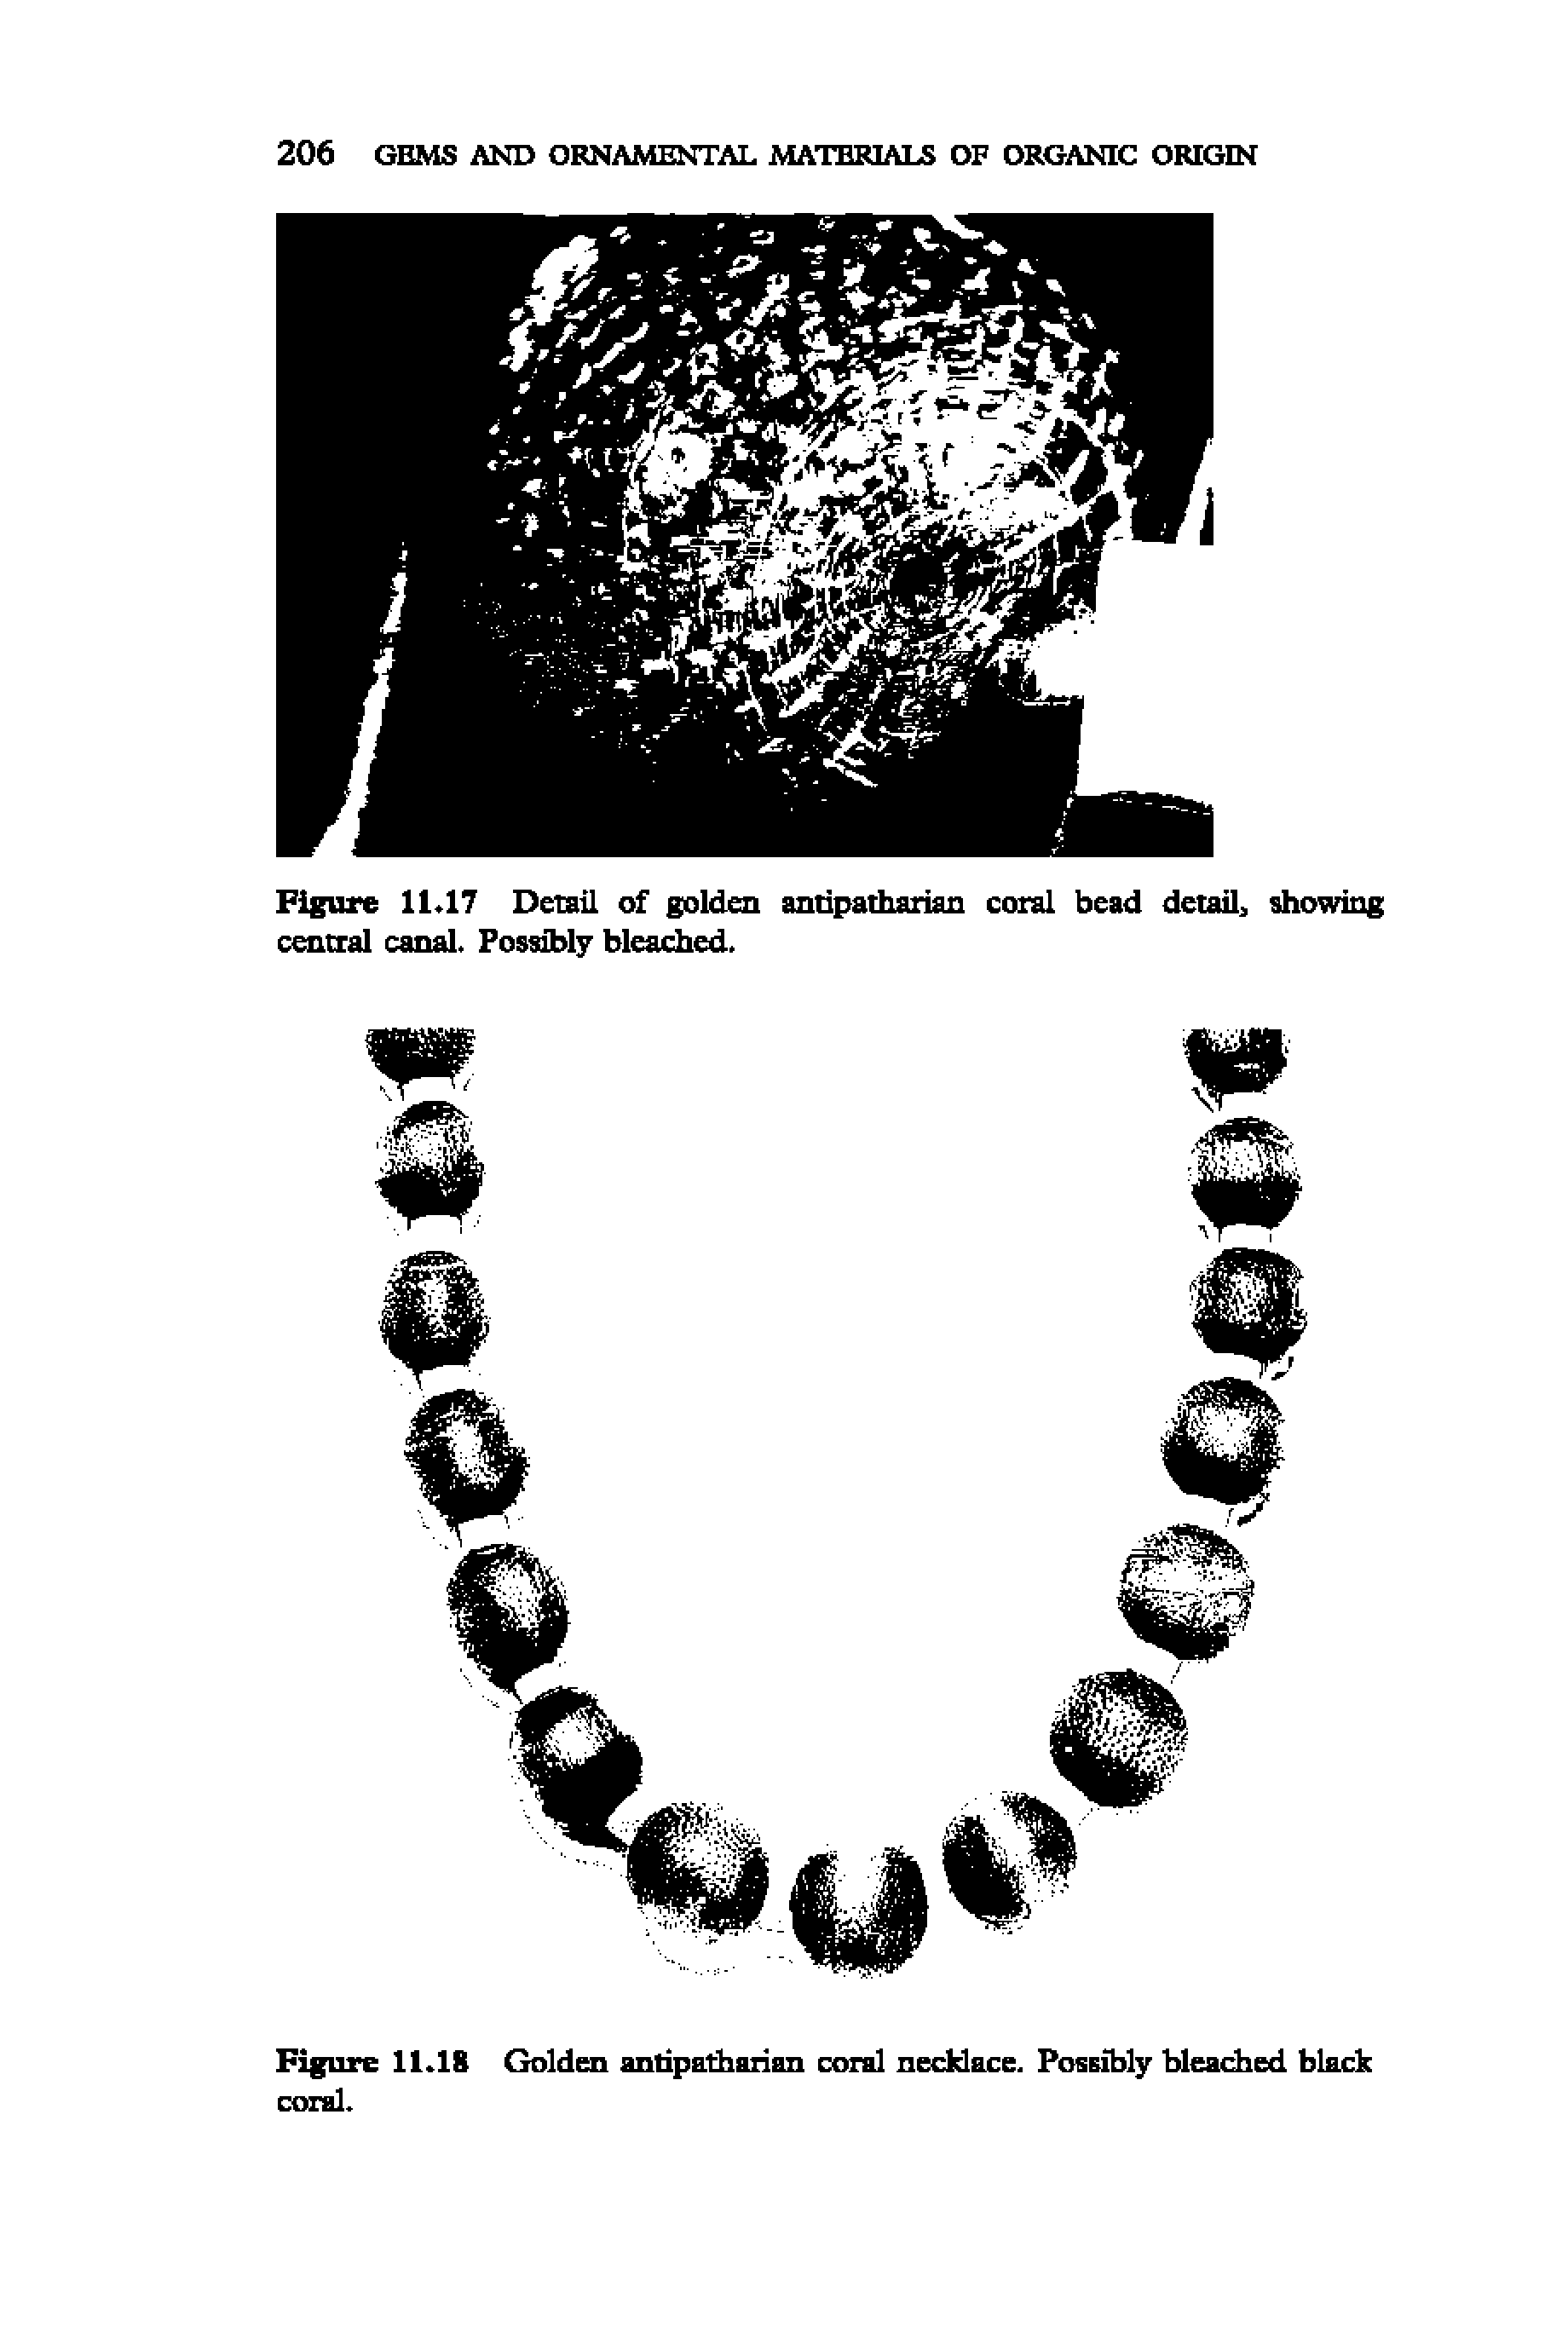 Figure 11.18 Golden antipatharian coral necklace. Possibly bleached black coral.